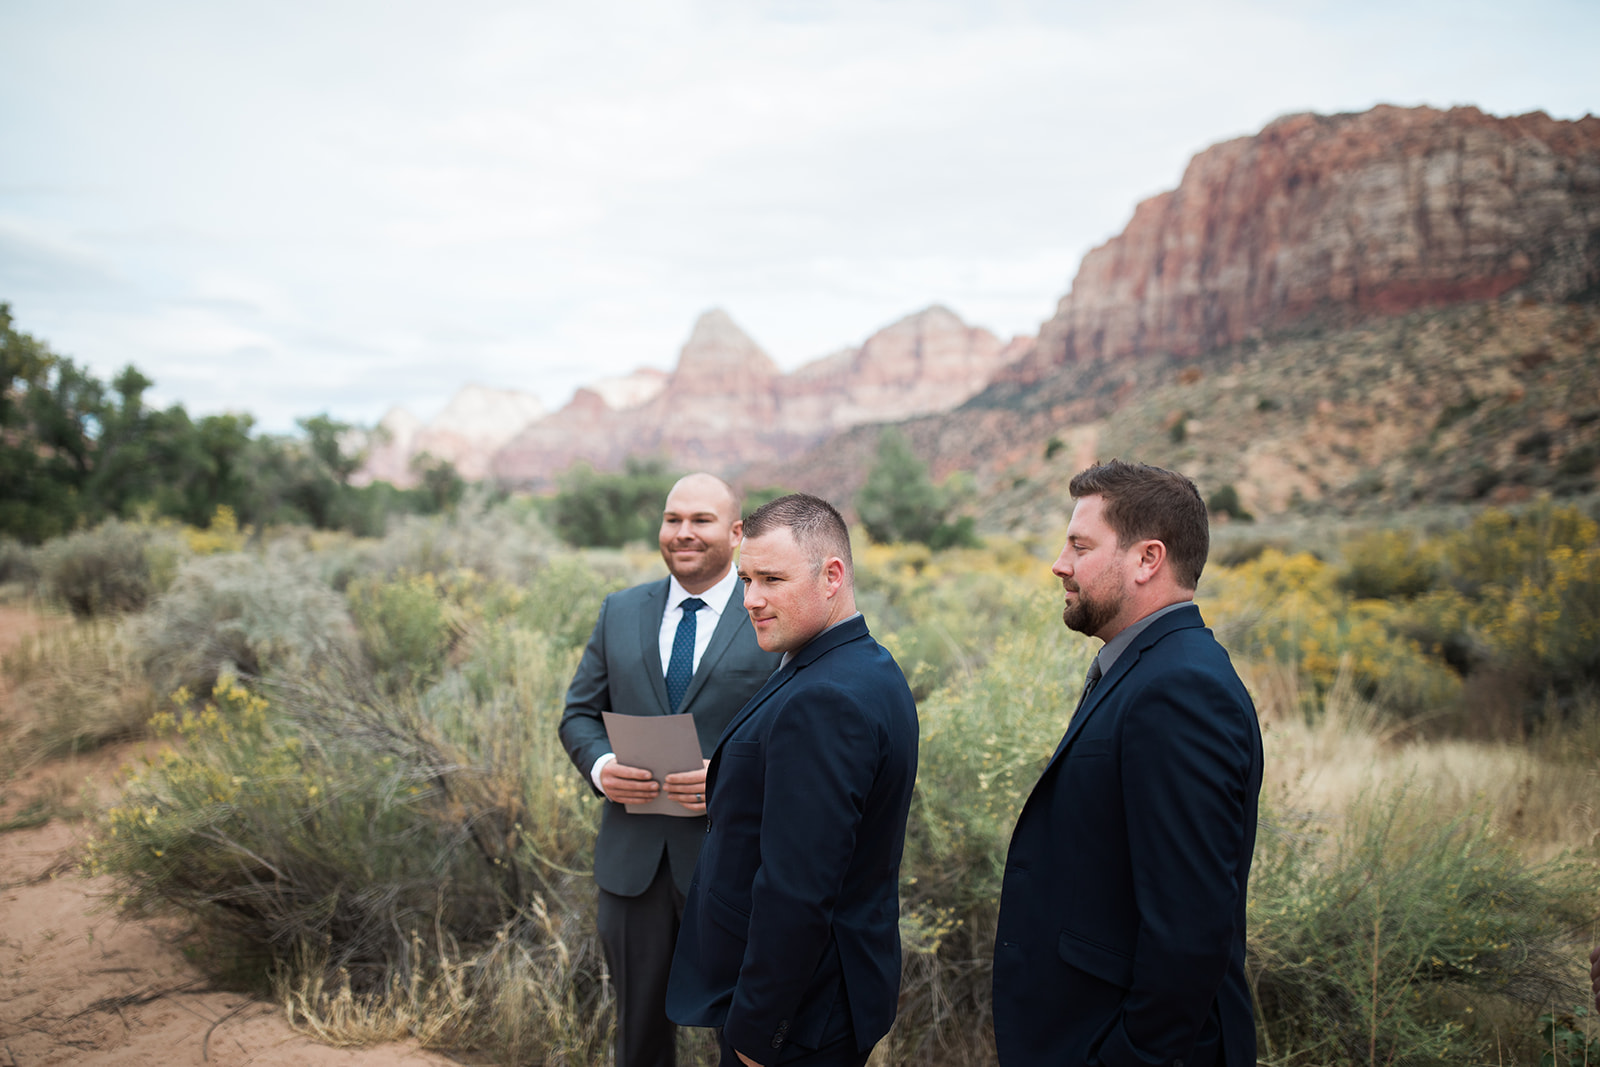 groom watches bride arrive in front of dramatic Zion mountain backdrop